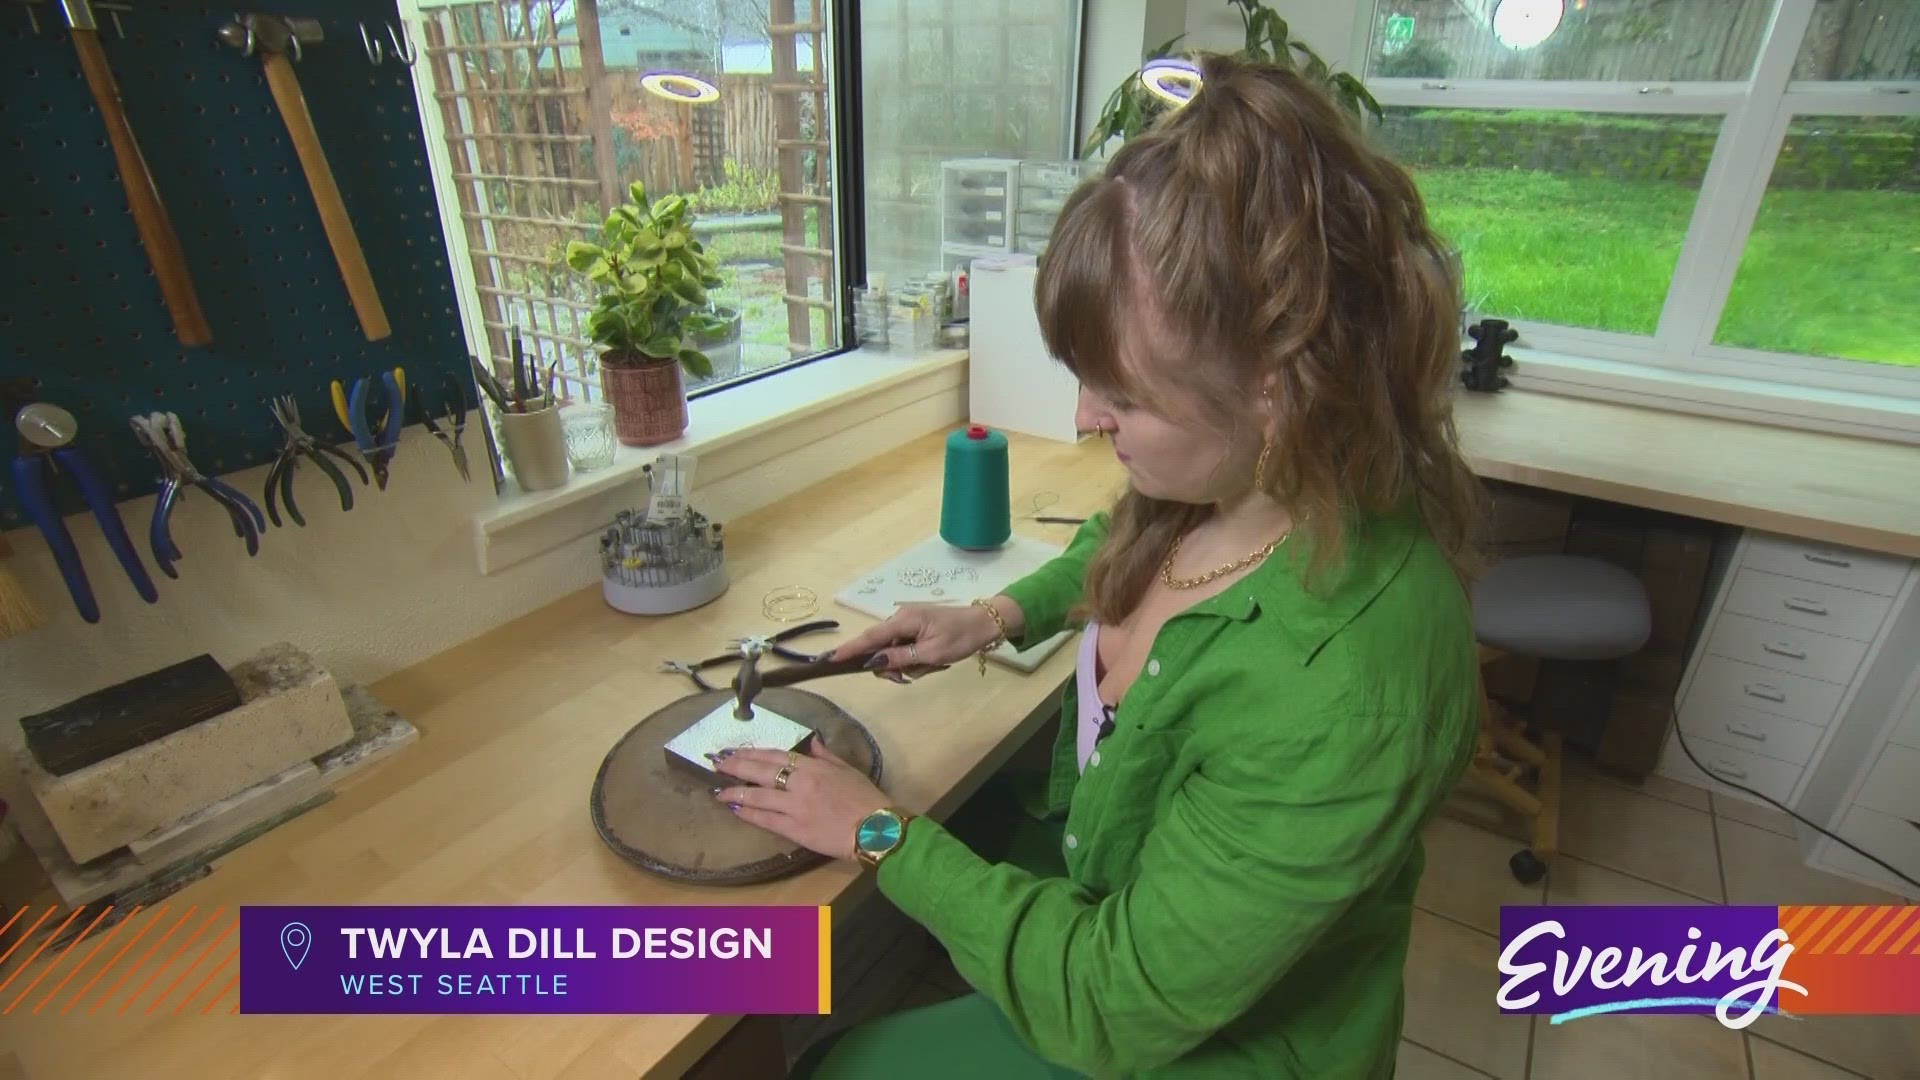 Twyla Dill Design creates hand-crocheted designs cast into metal for necklaces, bracelets, earrings and rings. #k5evening